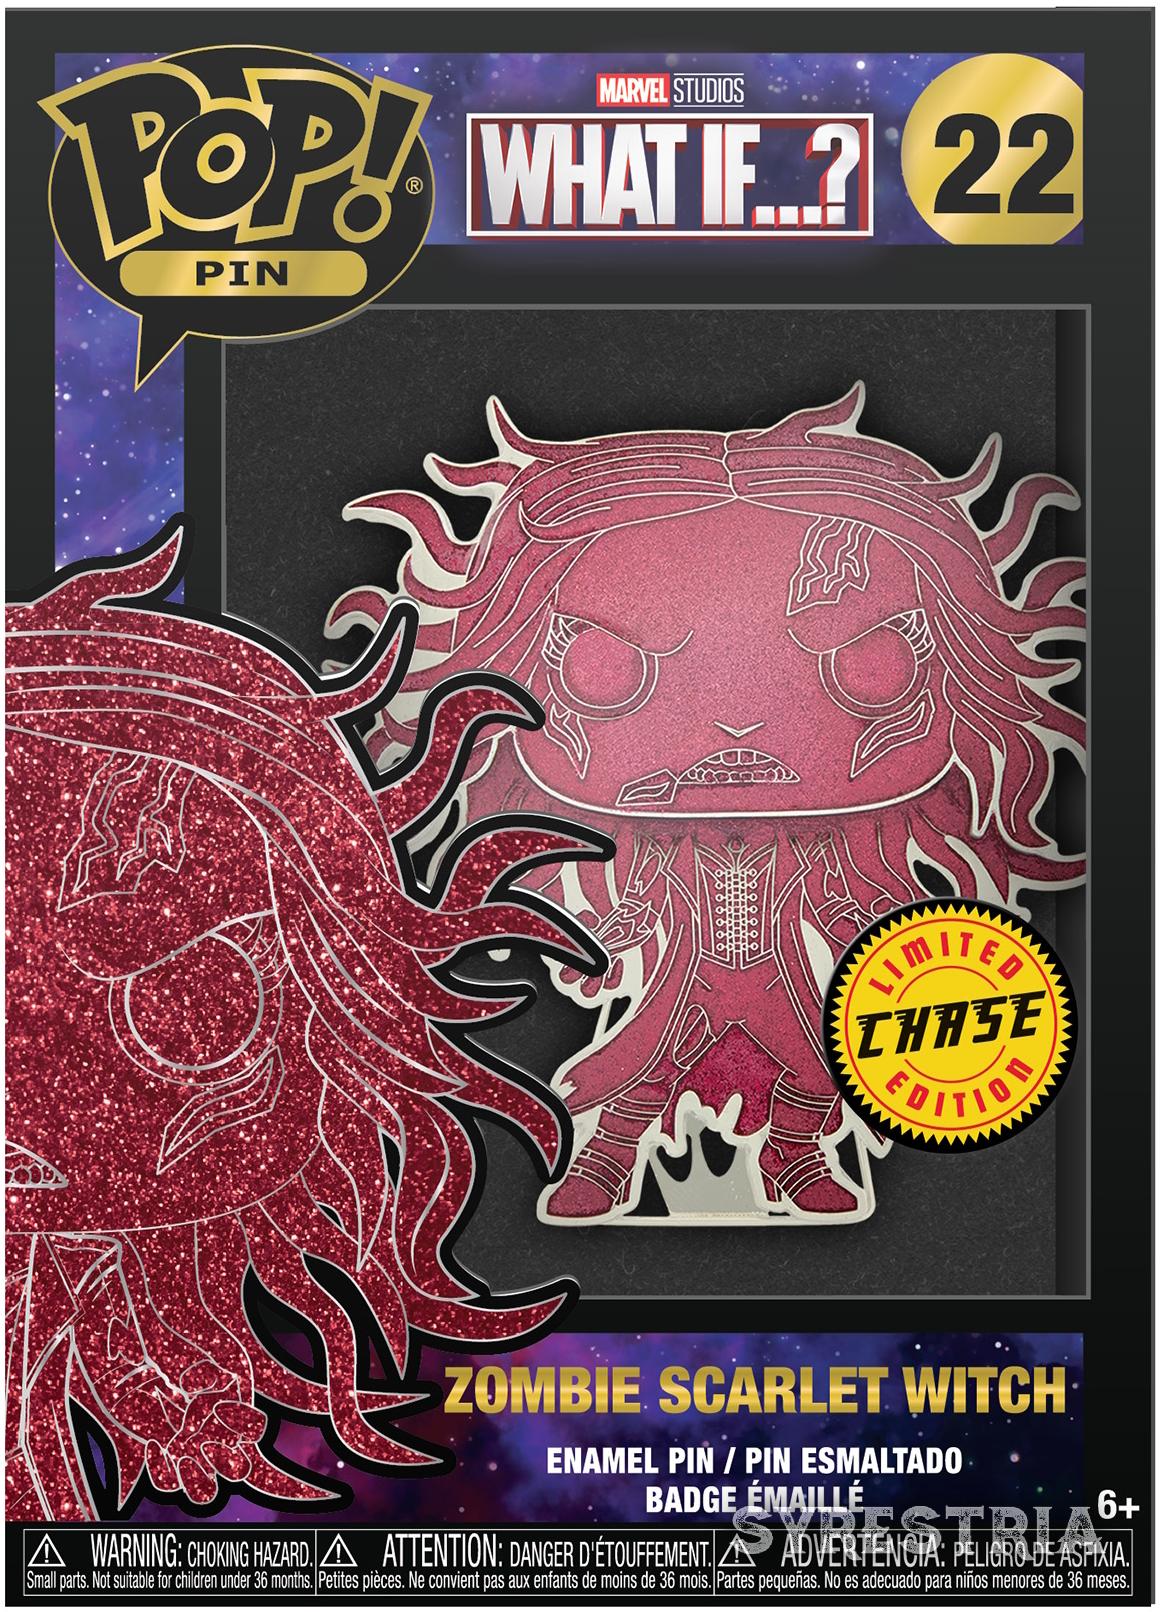 What IF…? - Zombie Scarlet Witch 22  Limited Chase Edition - Funko Pop! Pin